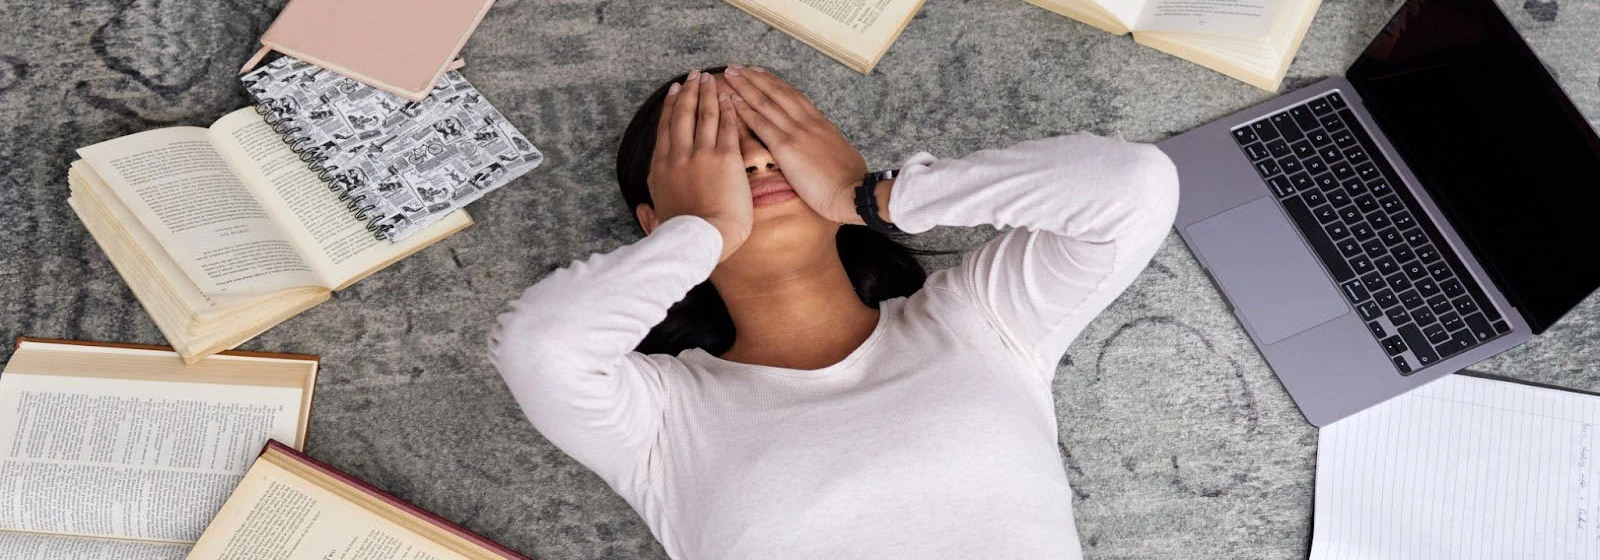 5 Expert Ways to Manage Academic Stress and Anxiety